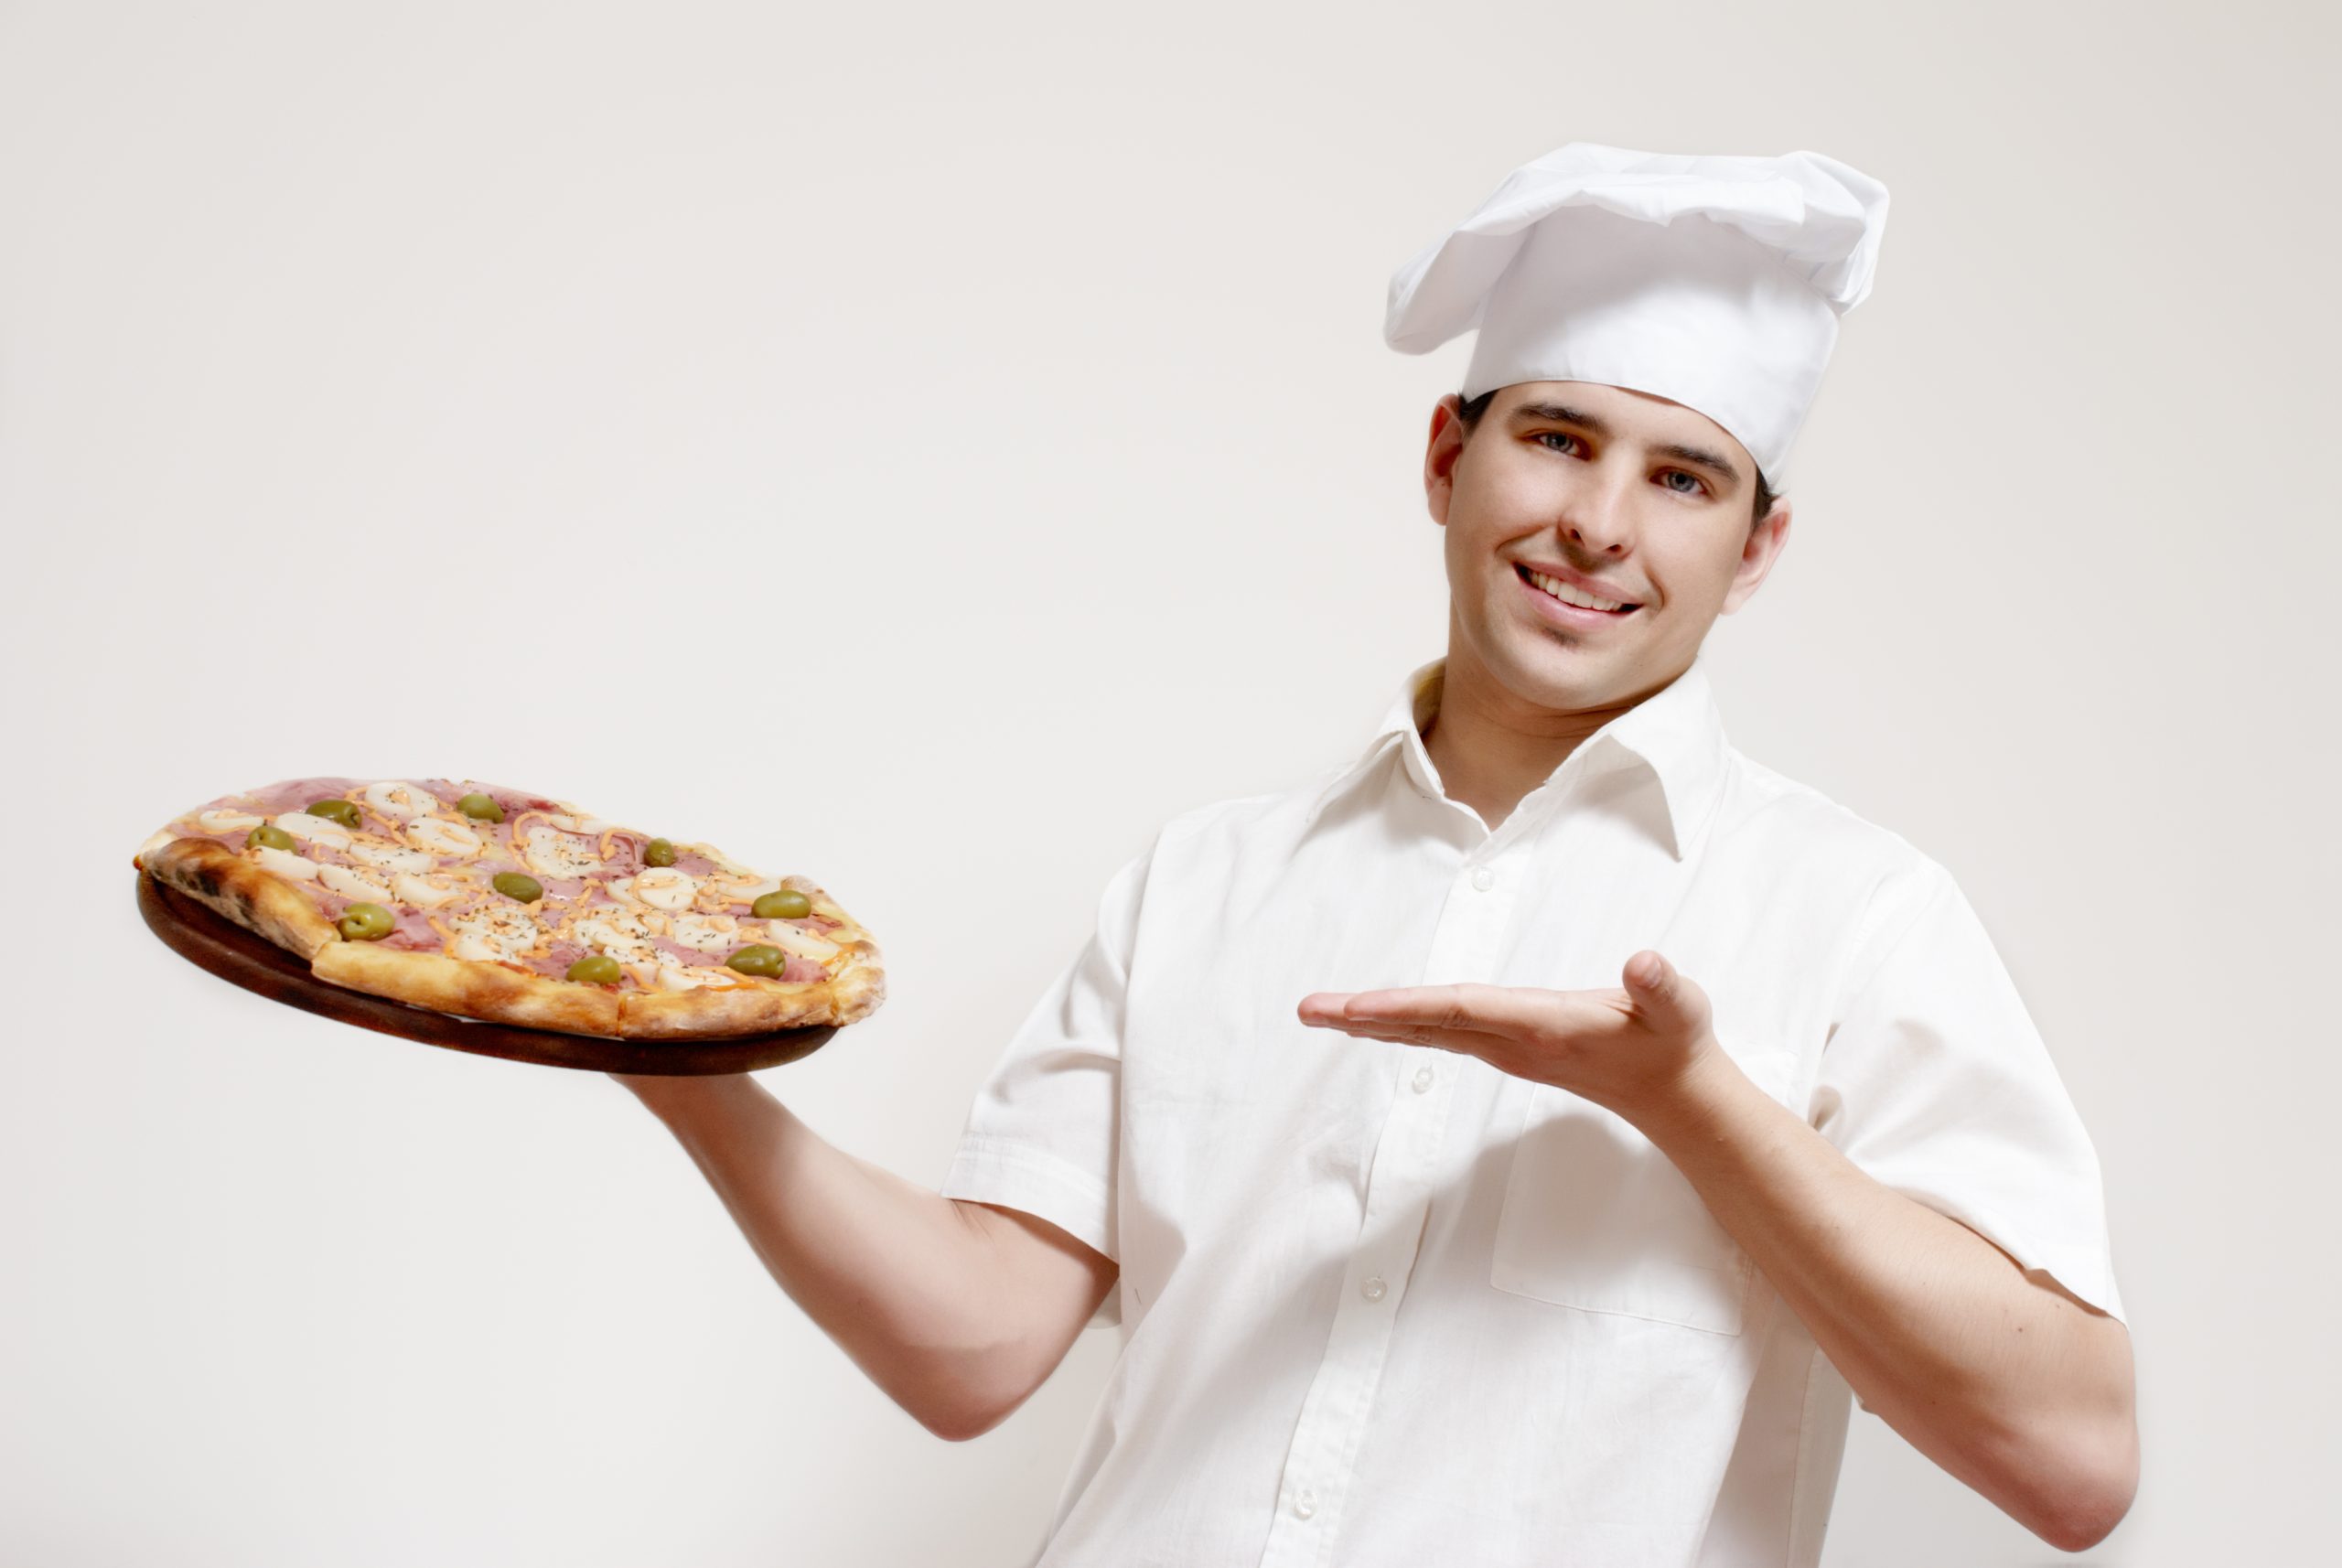 Portrait of happy attractive cook with a pizza in hands